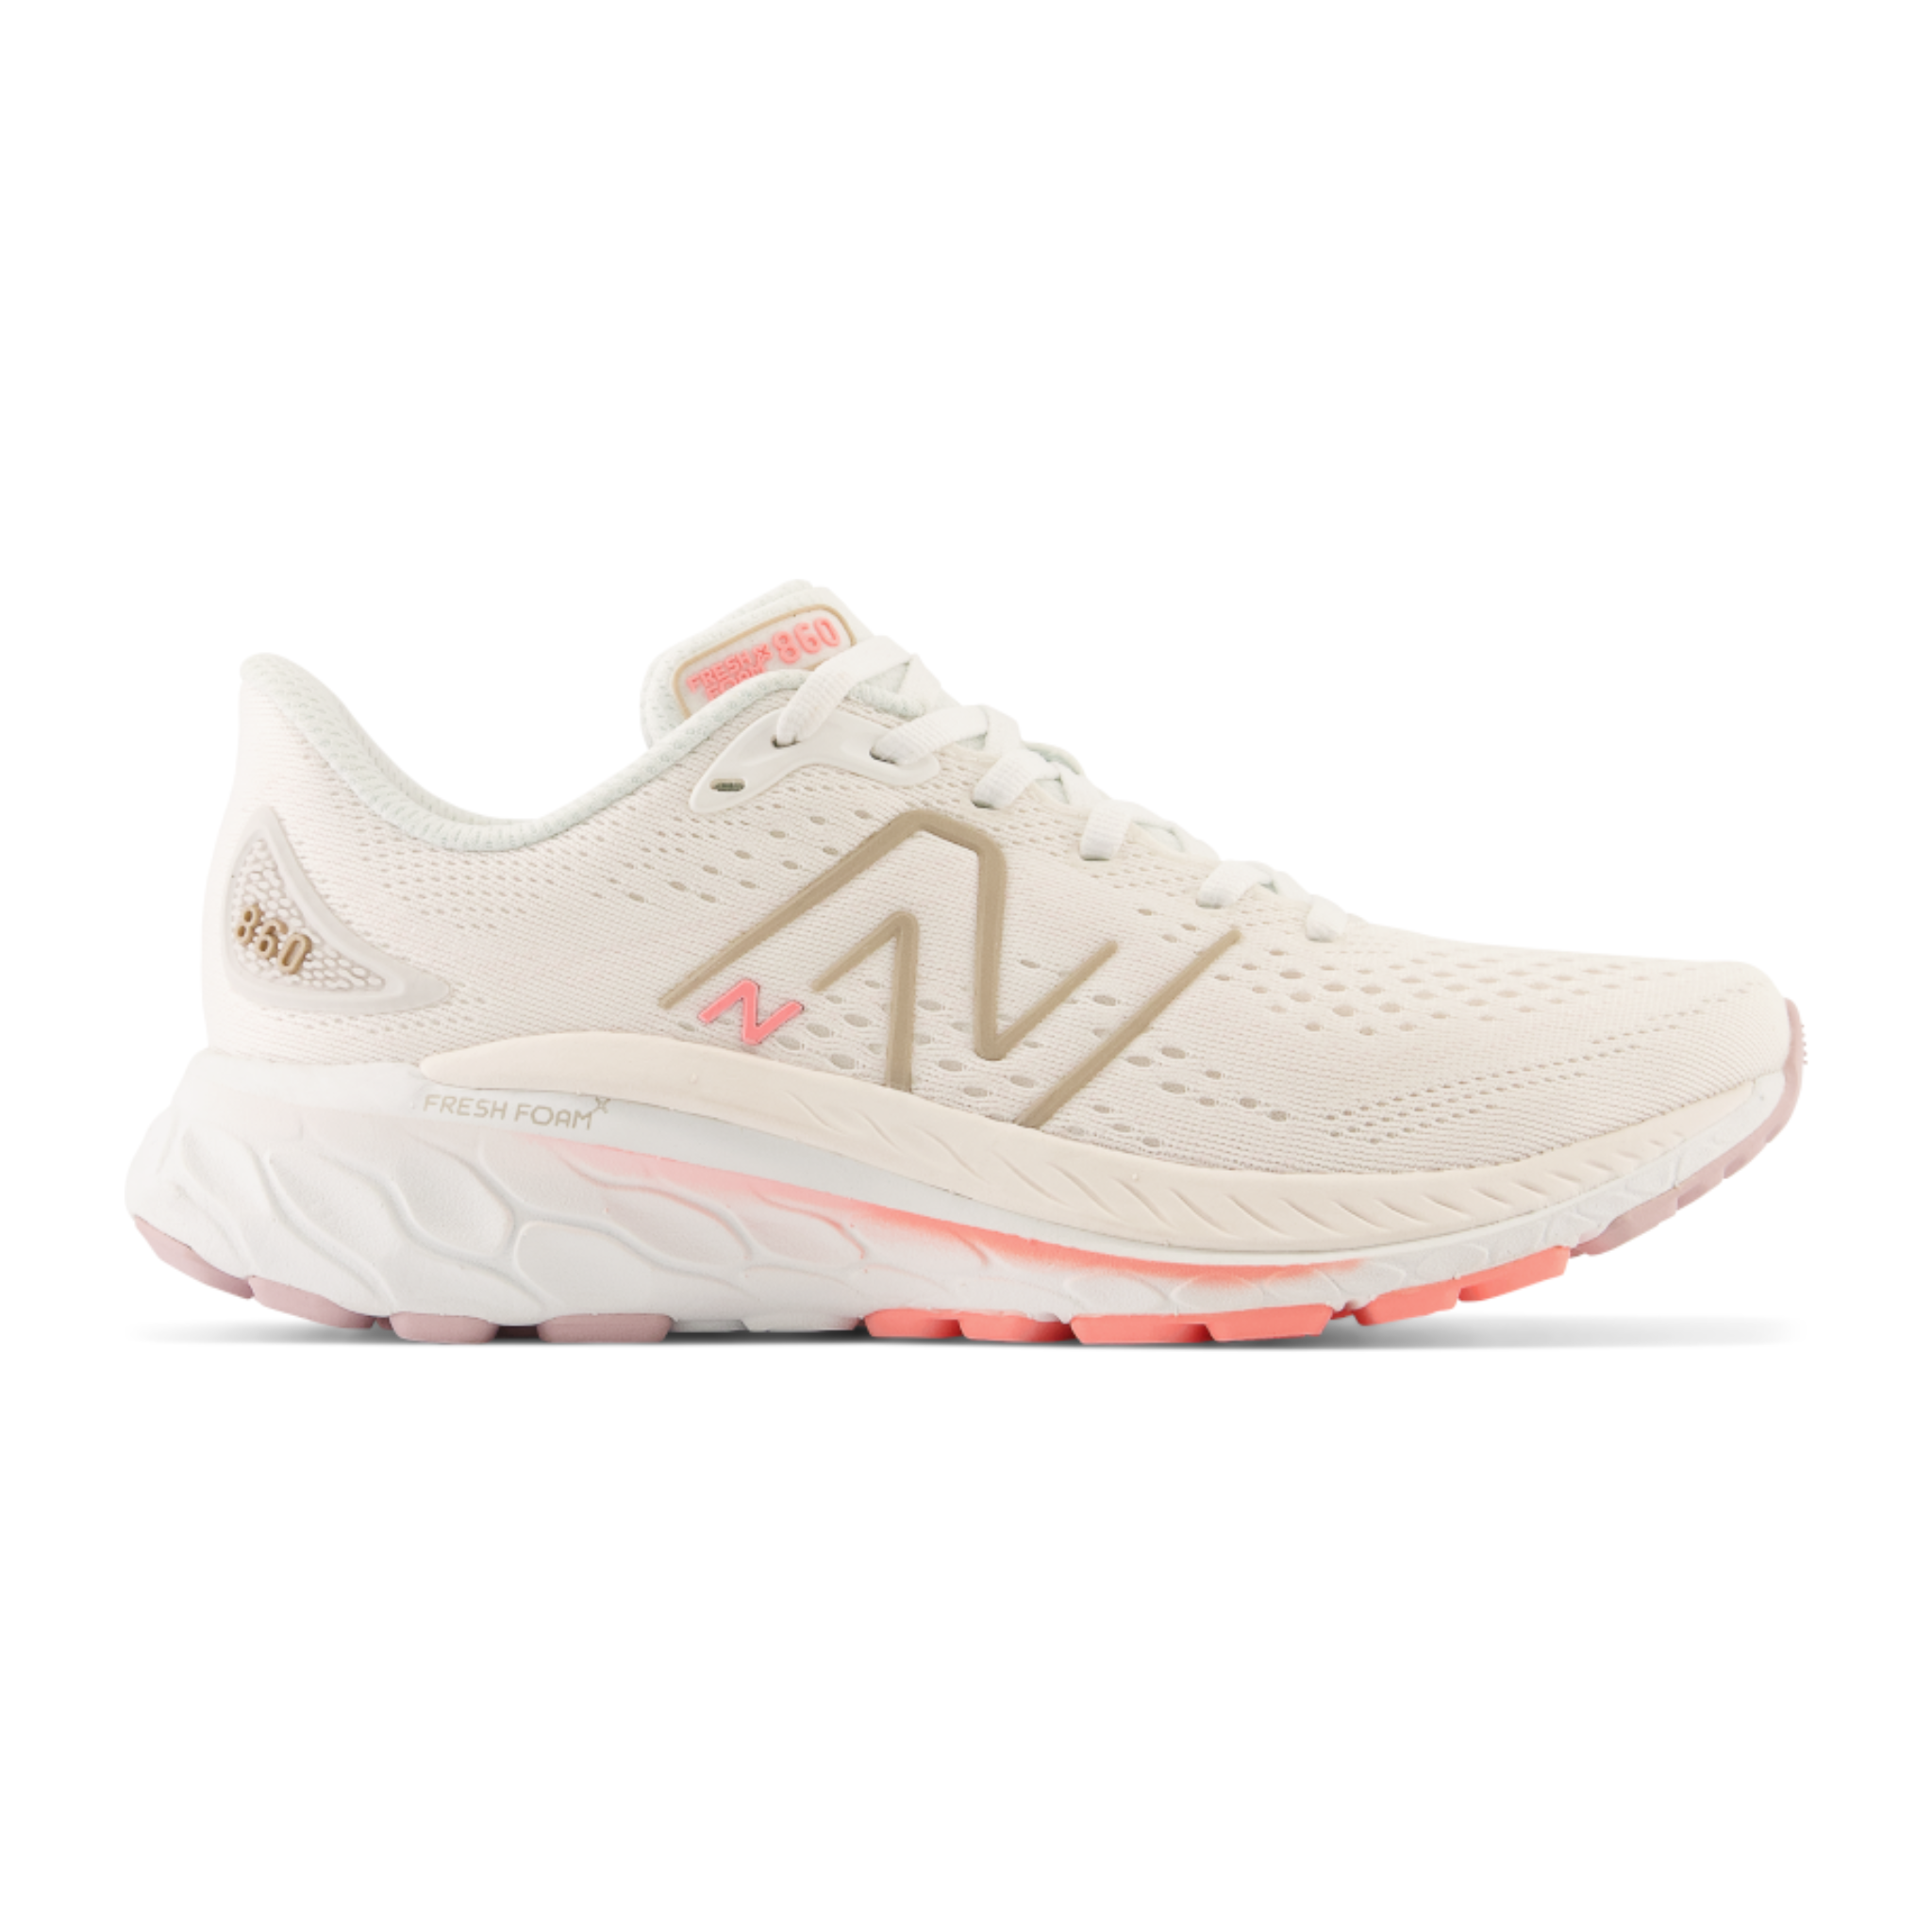 WOMEN'S 860 V13 WIDE D GRID 2 | Performance Running Outfitters